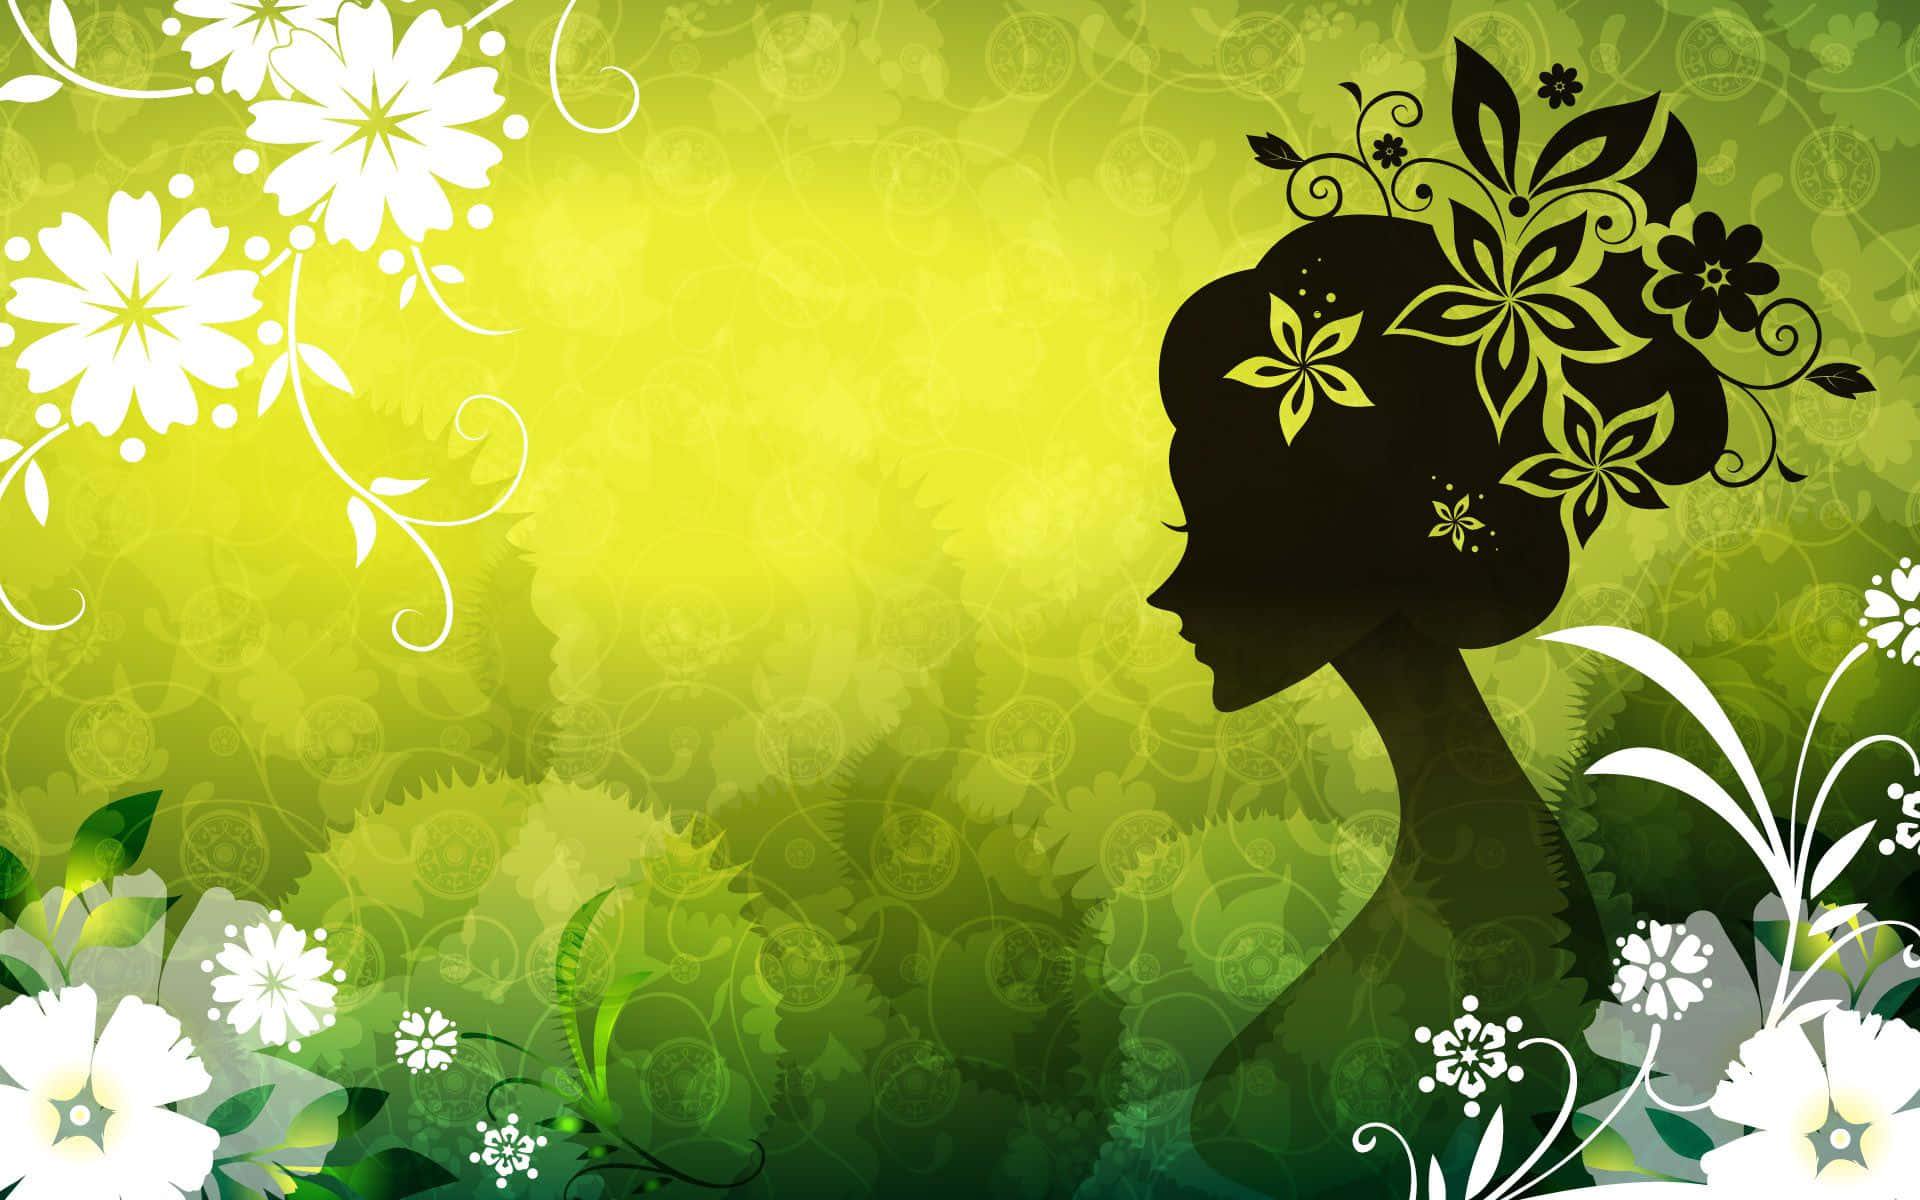 Woman And Flowers Silhouette Vector Background